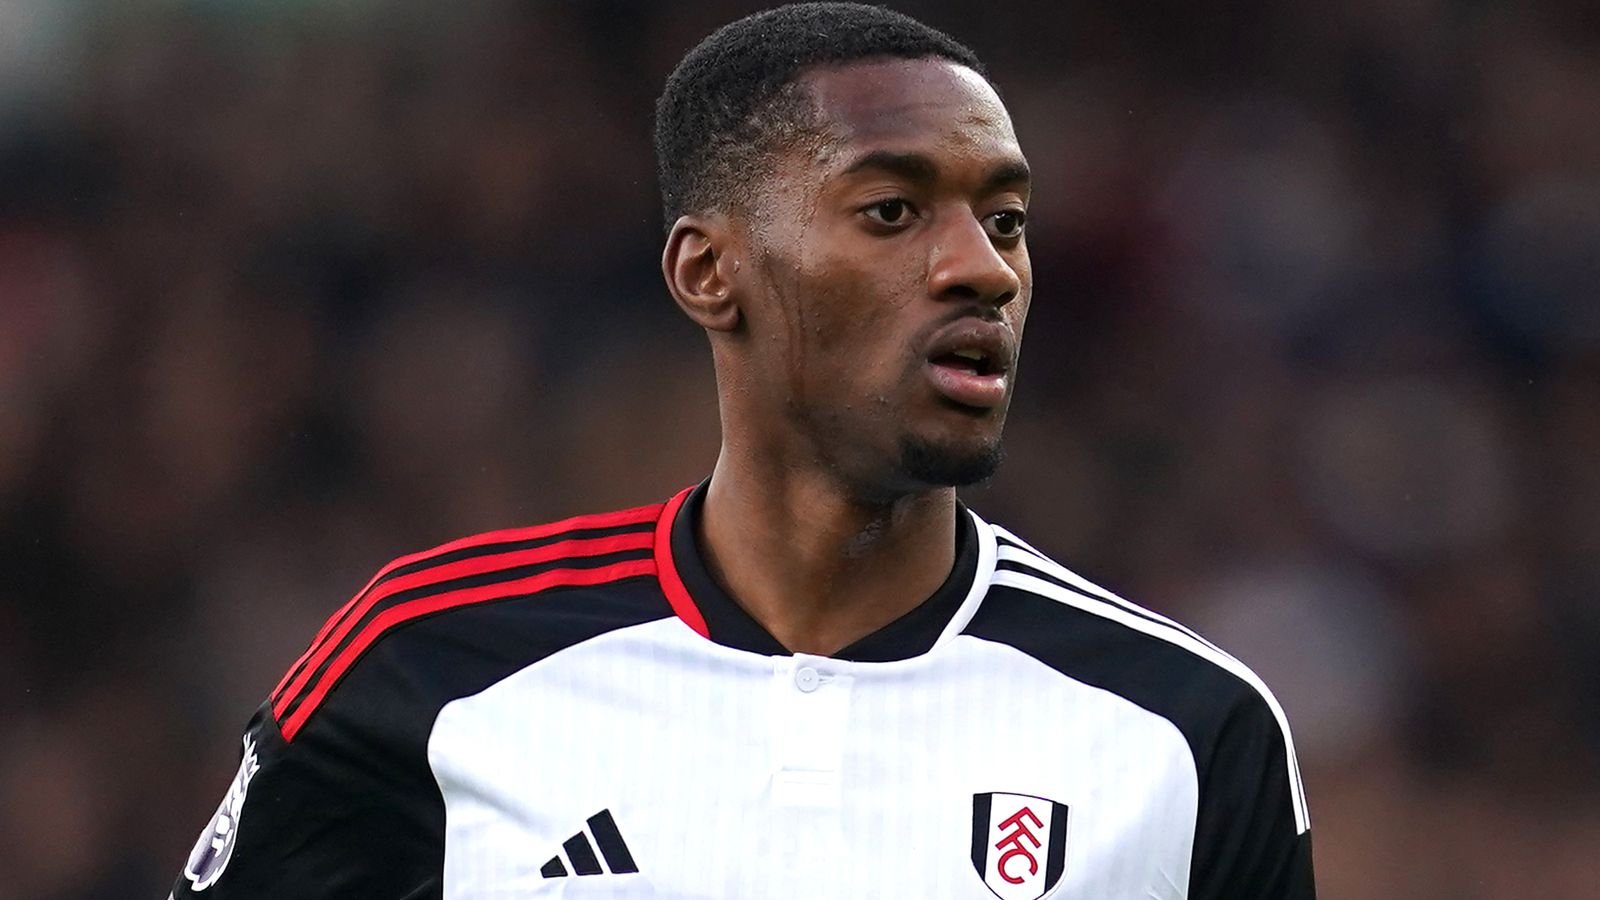 Chelsea transfer news: Tosin Adarabioyo to join Blues from Fulham on four-year contract | Transfer Centre News